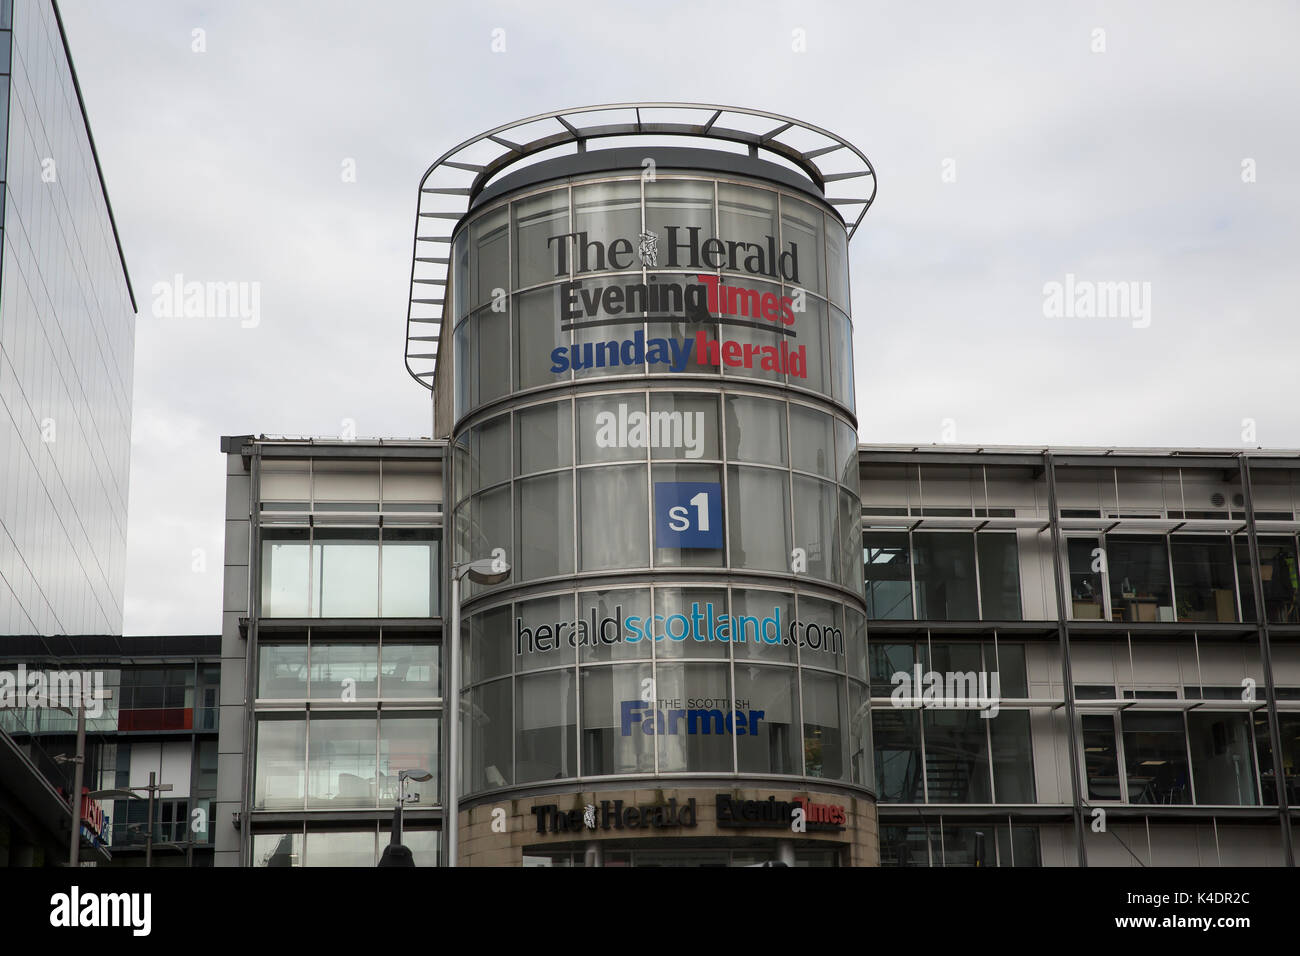 The Herald, Evening Times and Sunday Herald building in Glasgow Stock Photo